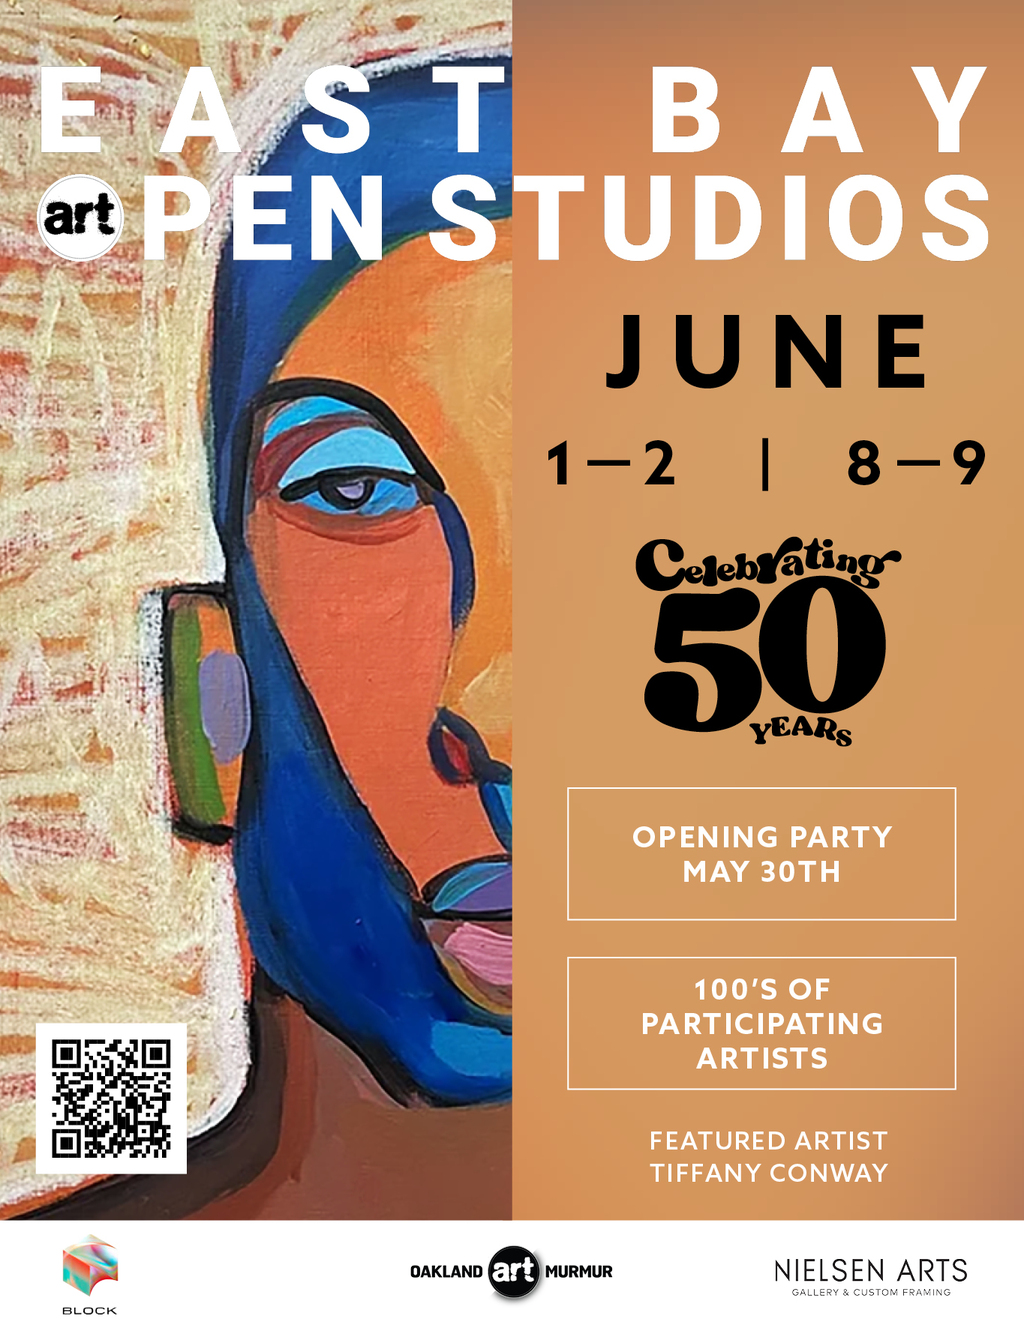 Studio One Arts Center Celebrate the 8th Anniversary of BAY art PEN STUDIOS with an Exciting Opening Party  promotion flier on Digifli com